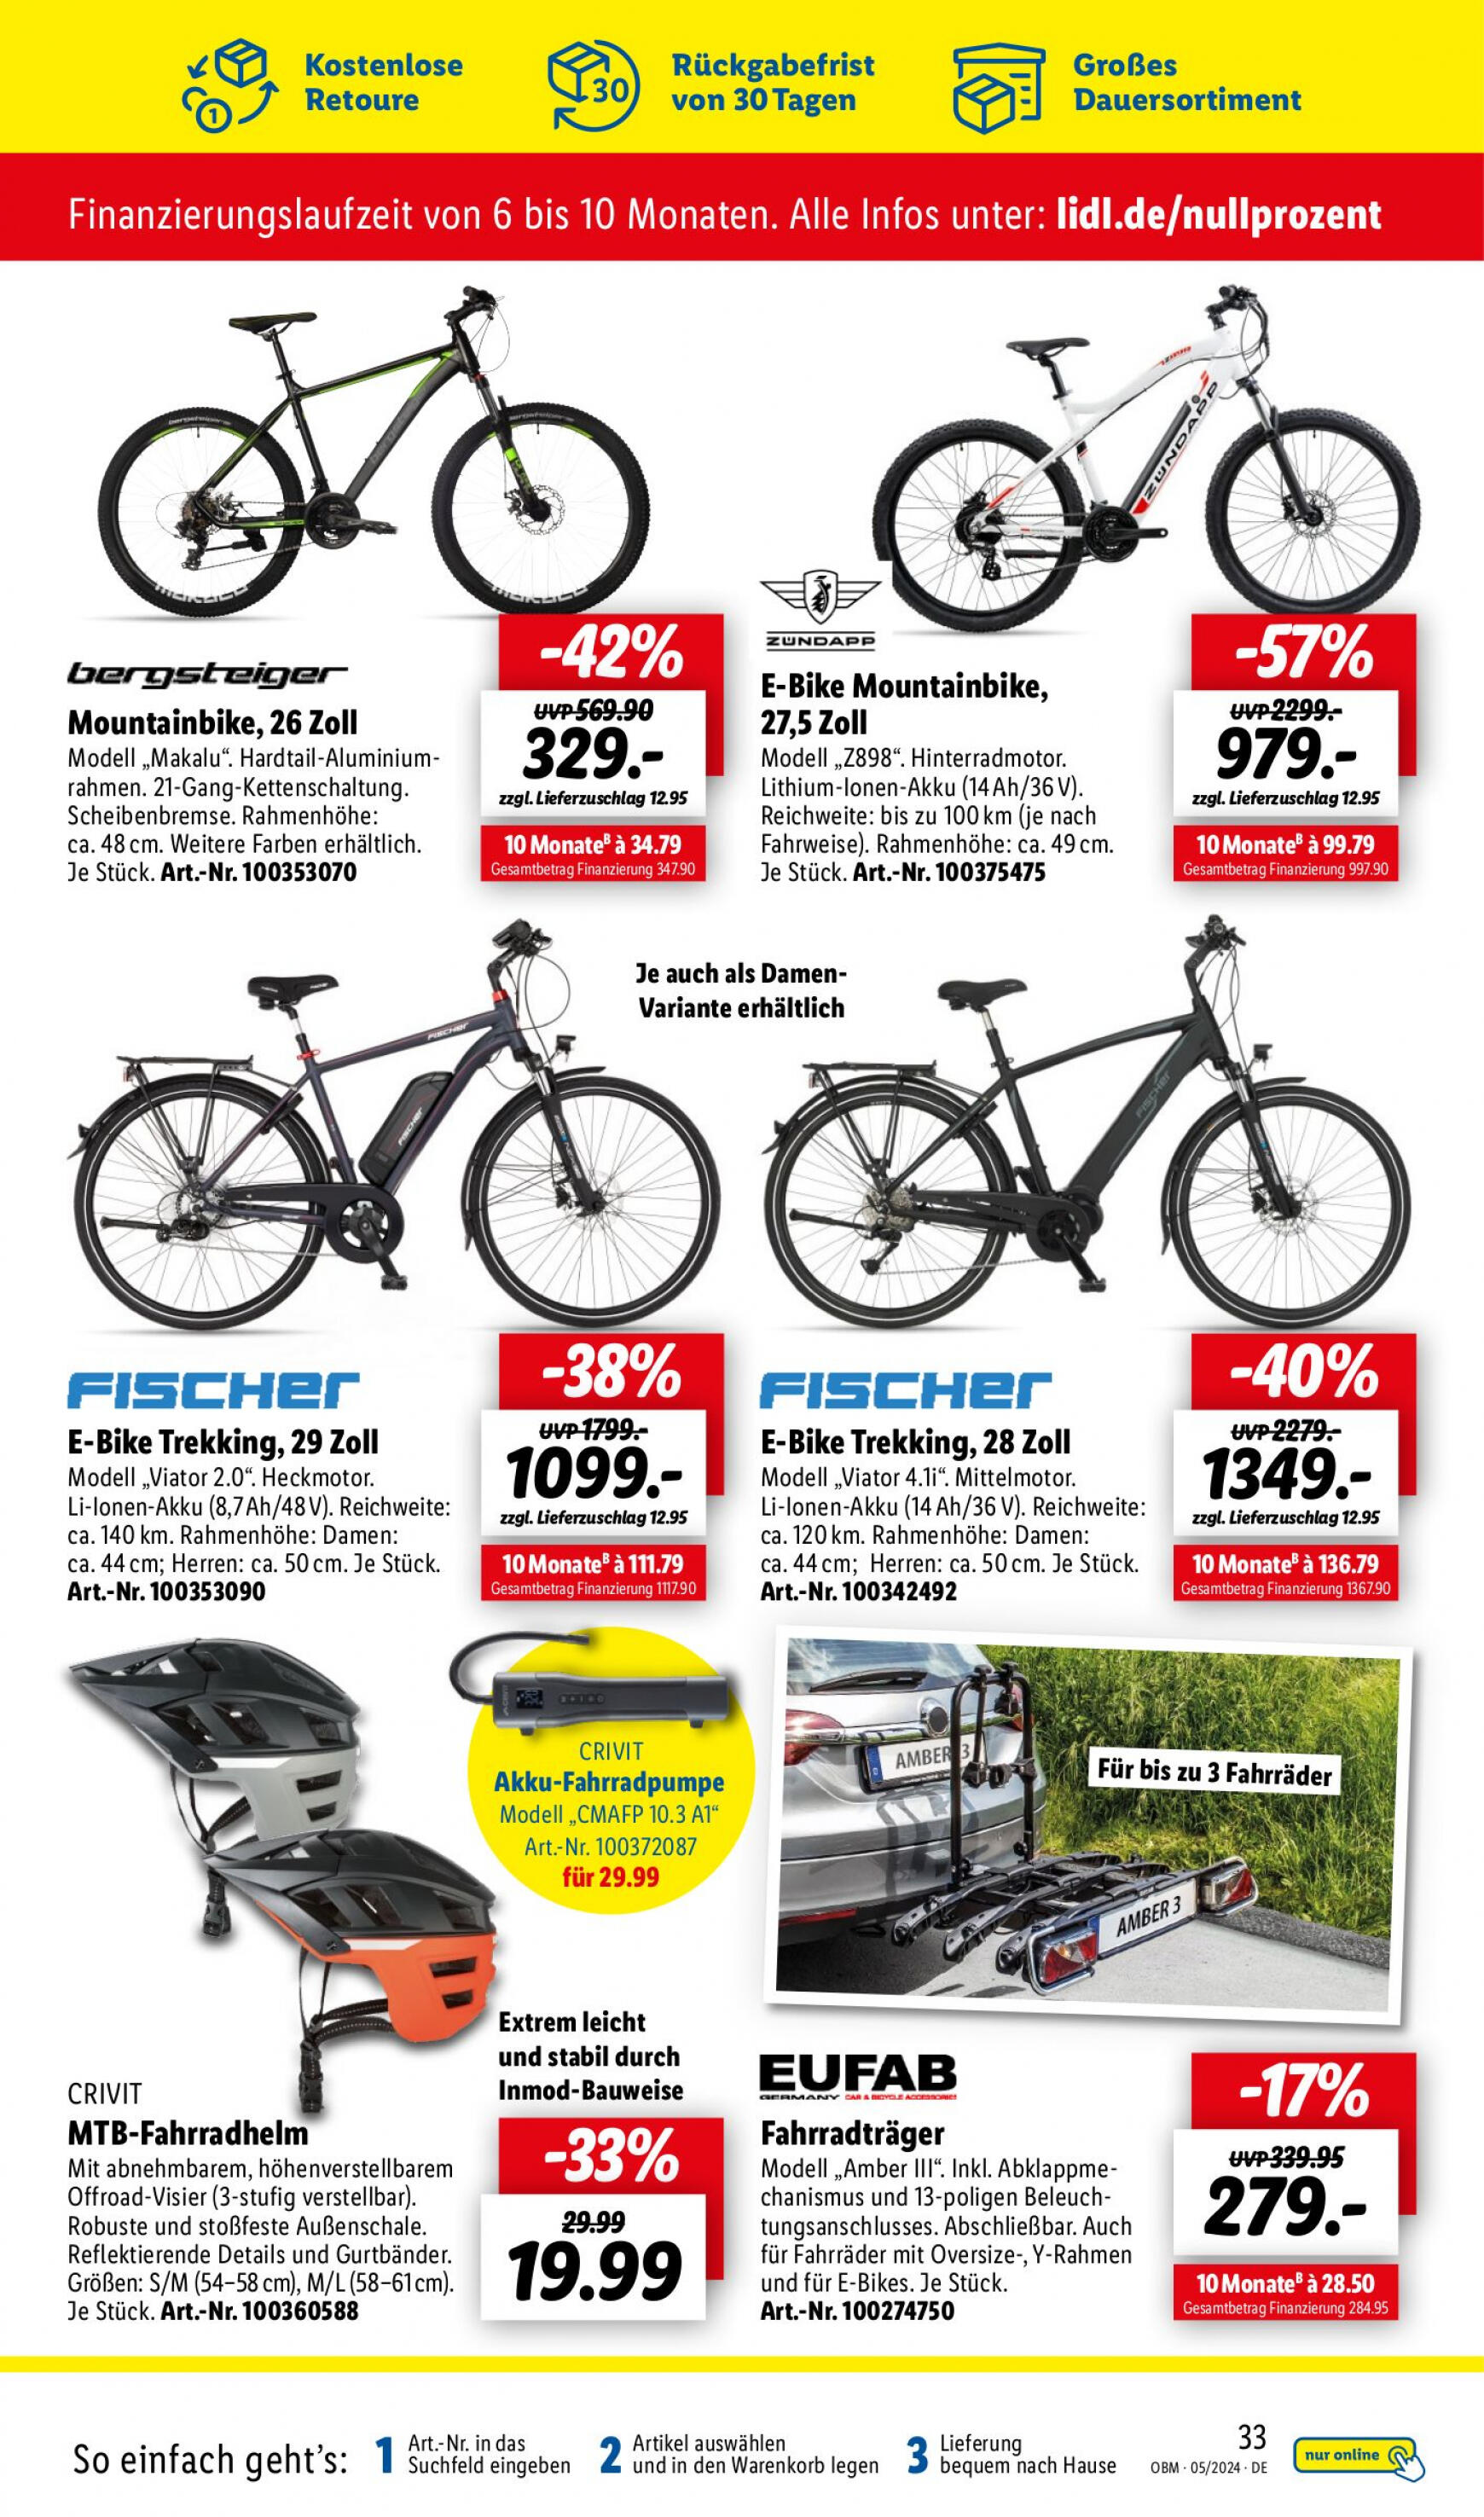 lidl - Flyer Lidl - Aktuelle Onlineshop-Highlights aktuell 01.05. - 31.05. - page: 33